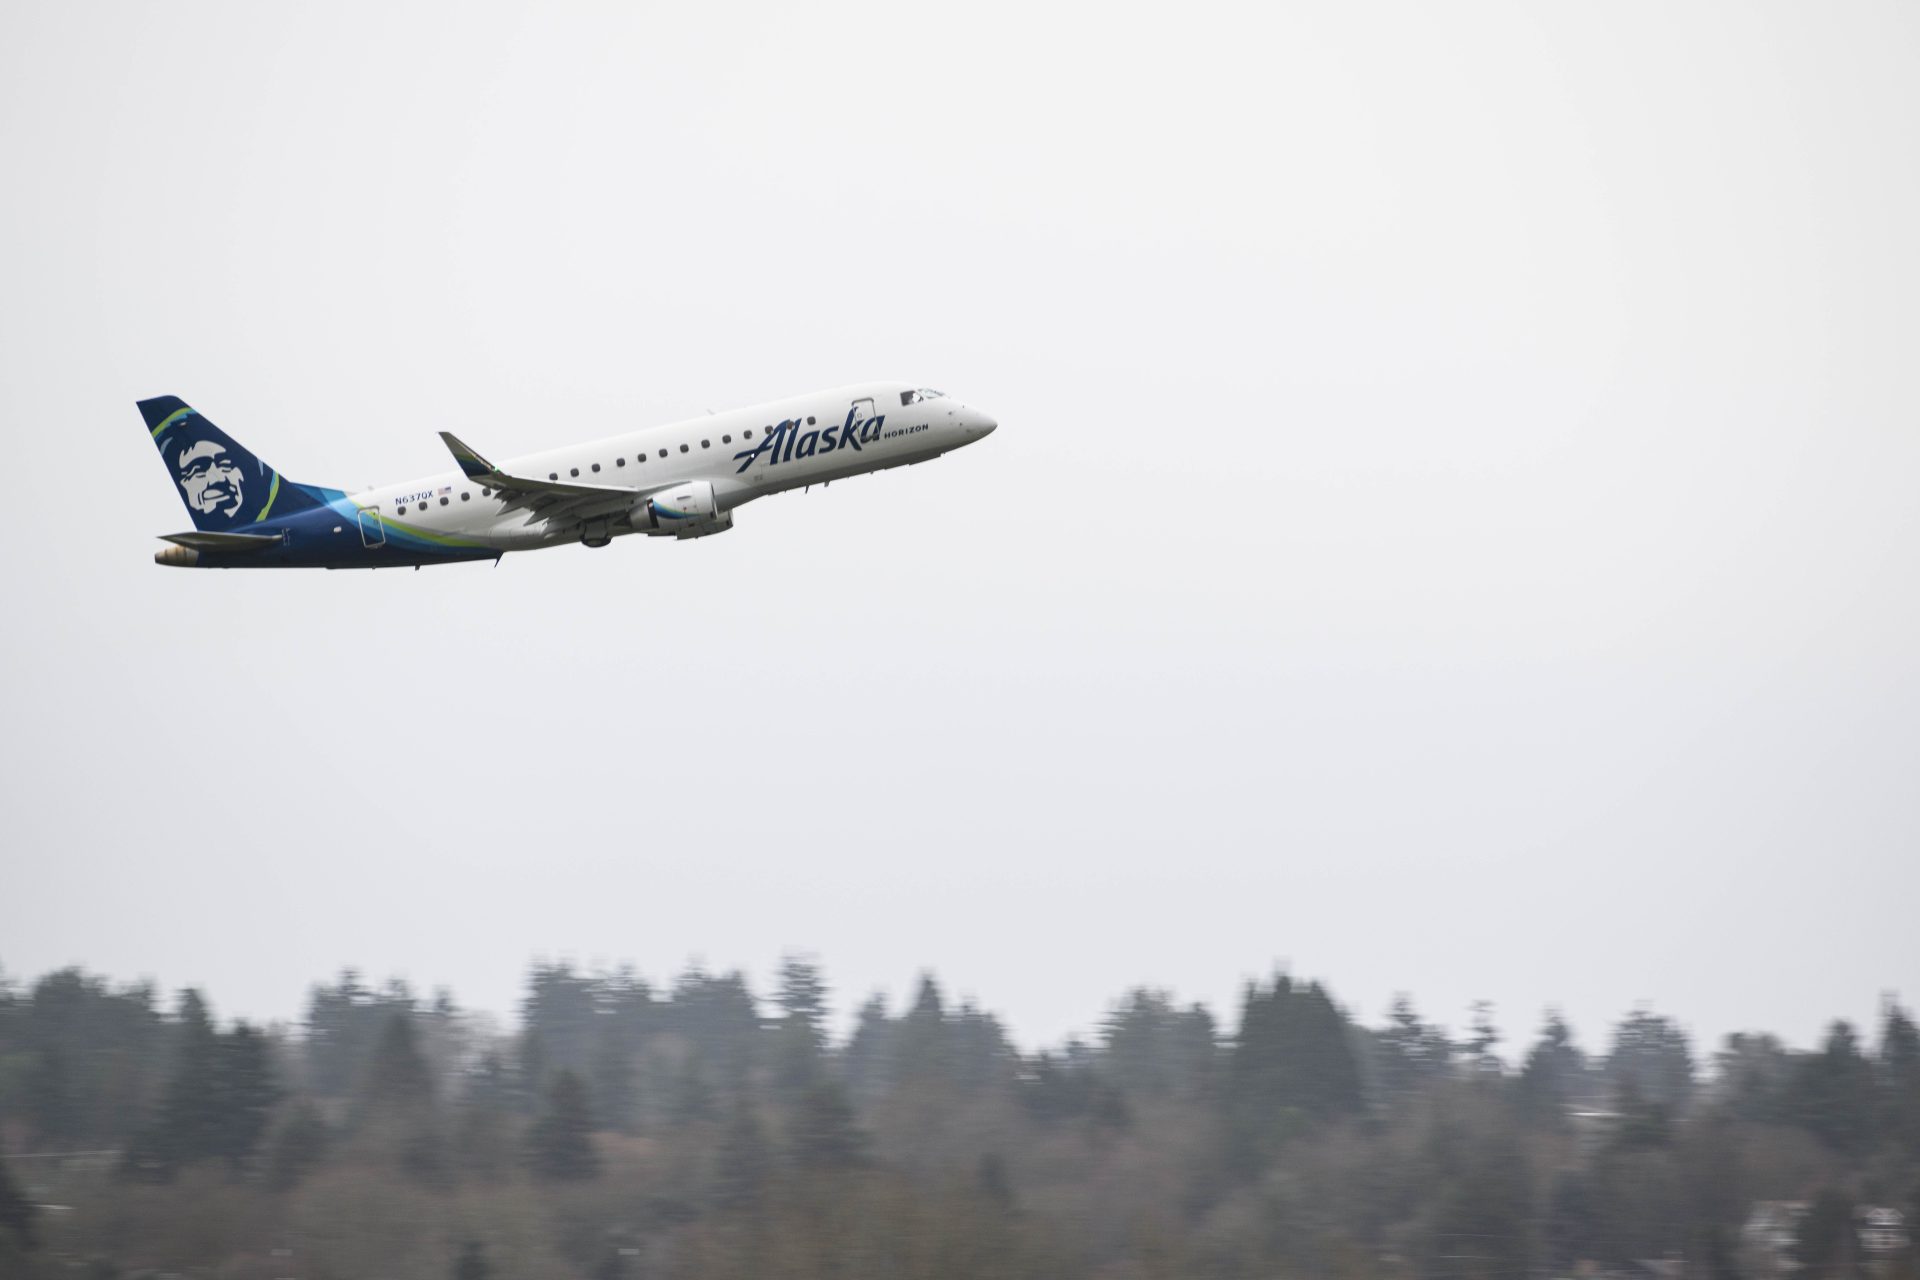 Alaska Airlines Offers Refund & Extra Pay After Plane Door Incident